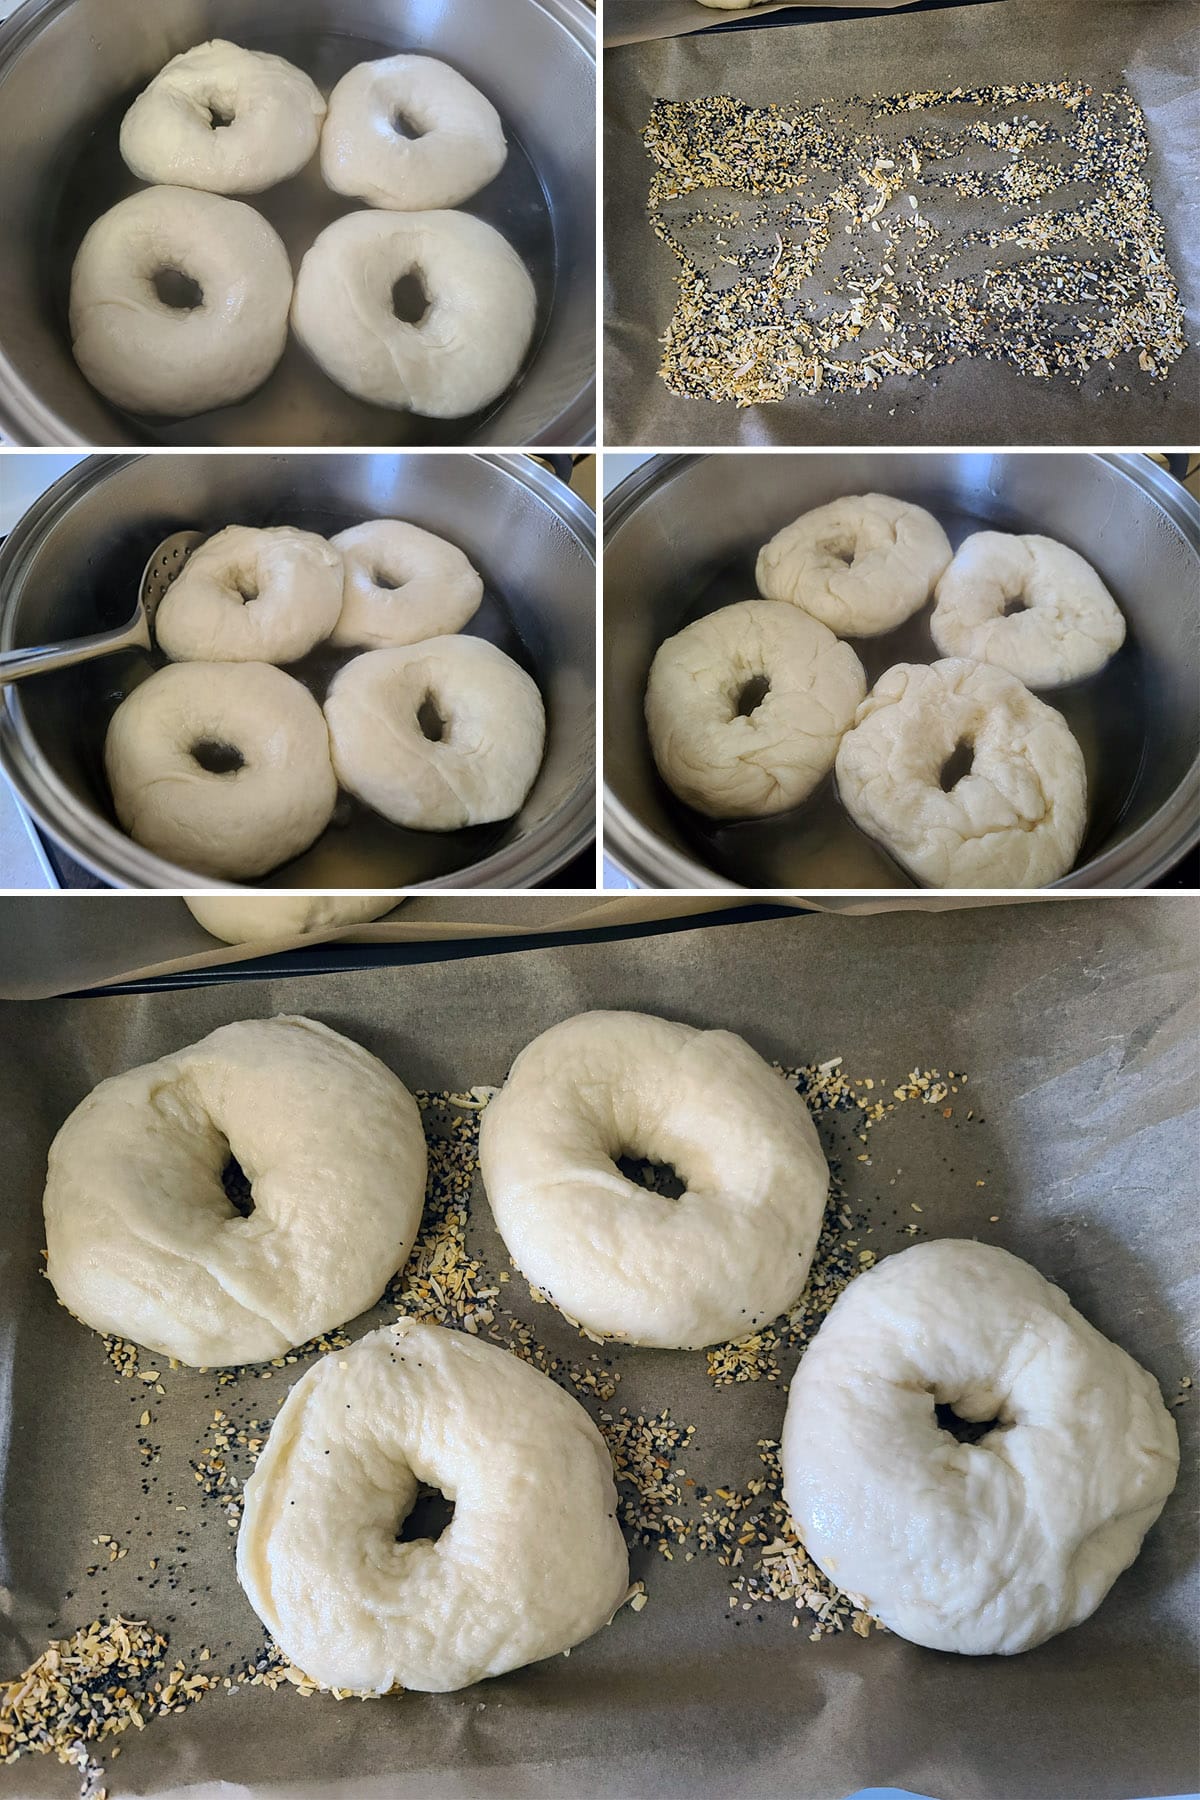 A 5 part image showing bagels being boiled and arranged on a pan.